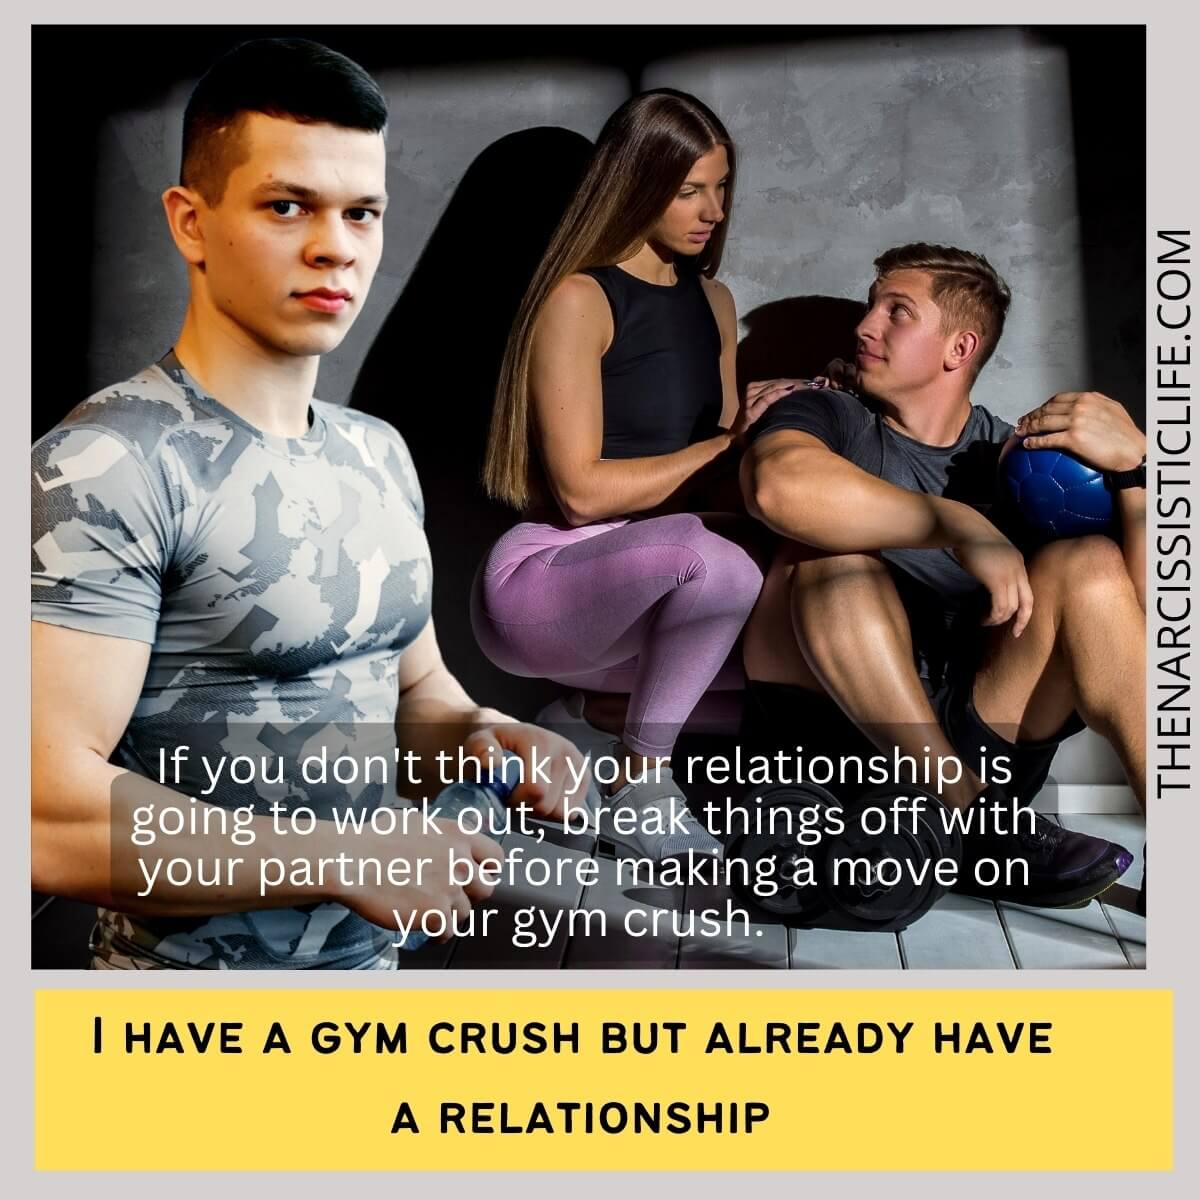 How To Flirt And Approach Your Gym Crush? - The Narcissistic Life